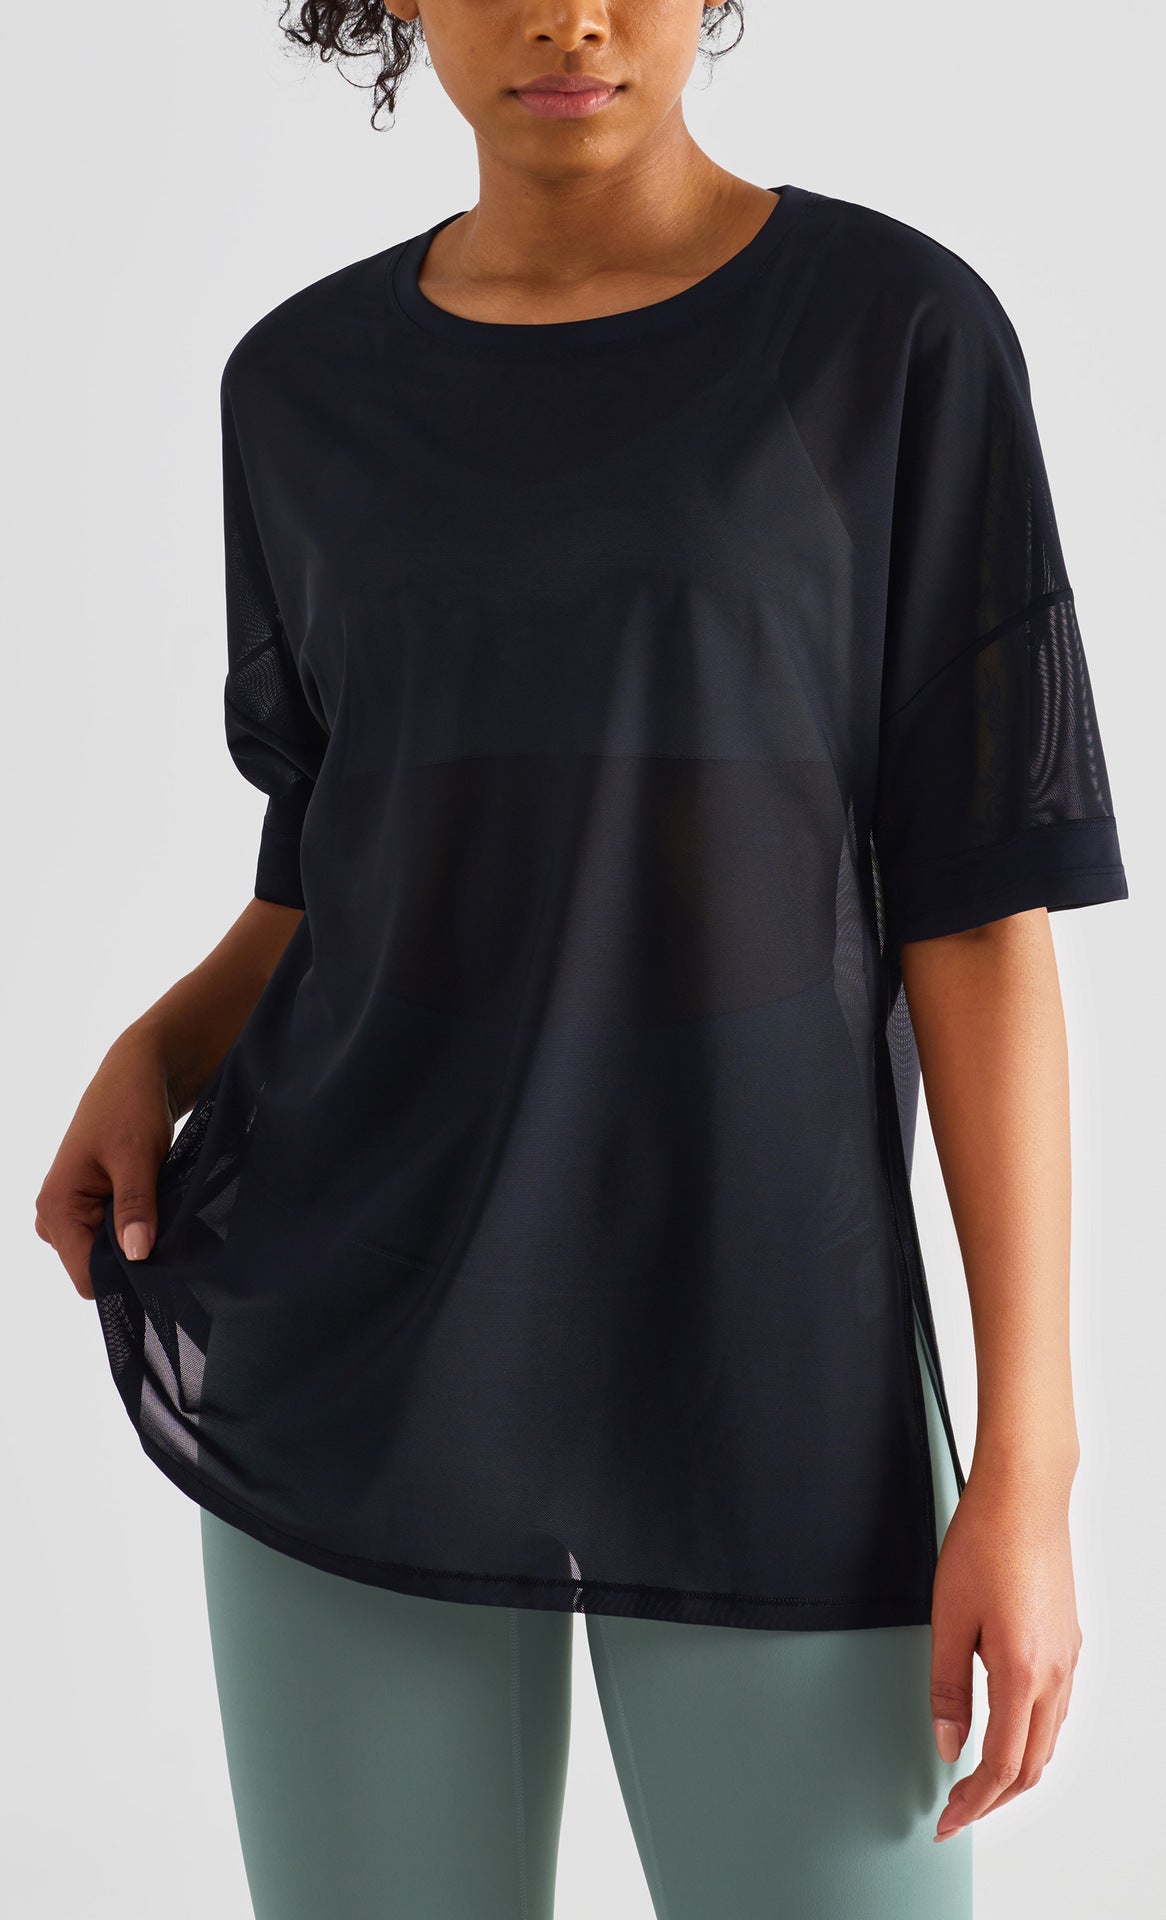 Mesh Stitching Casual Sports Top & Cover Up